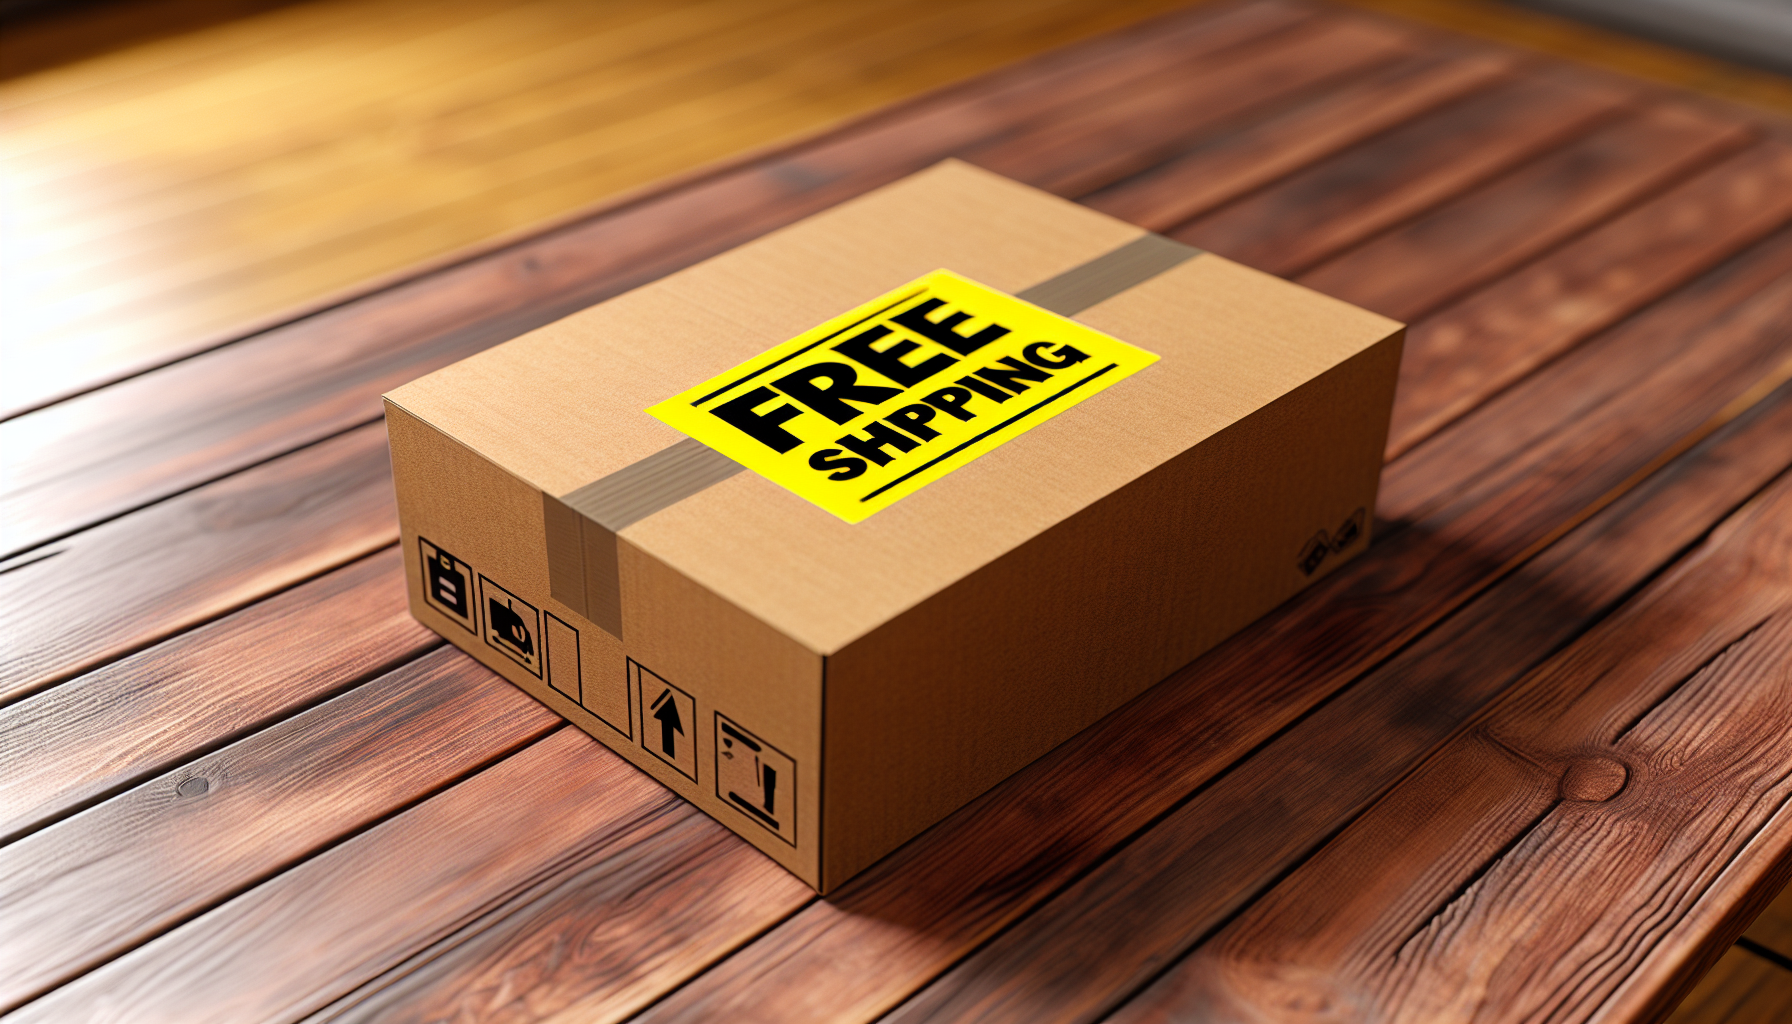 Shipping box with free shipping label